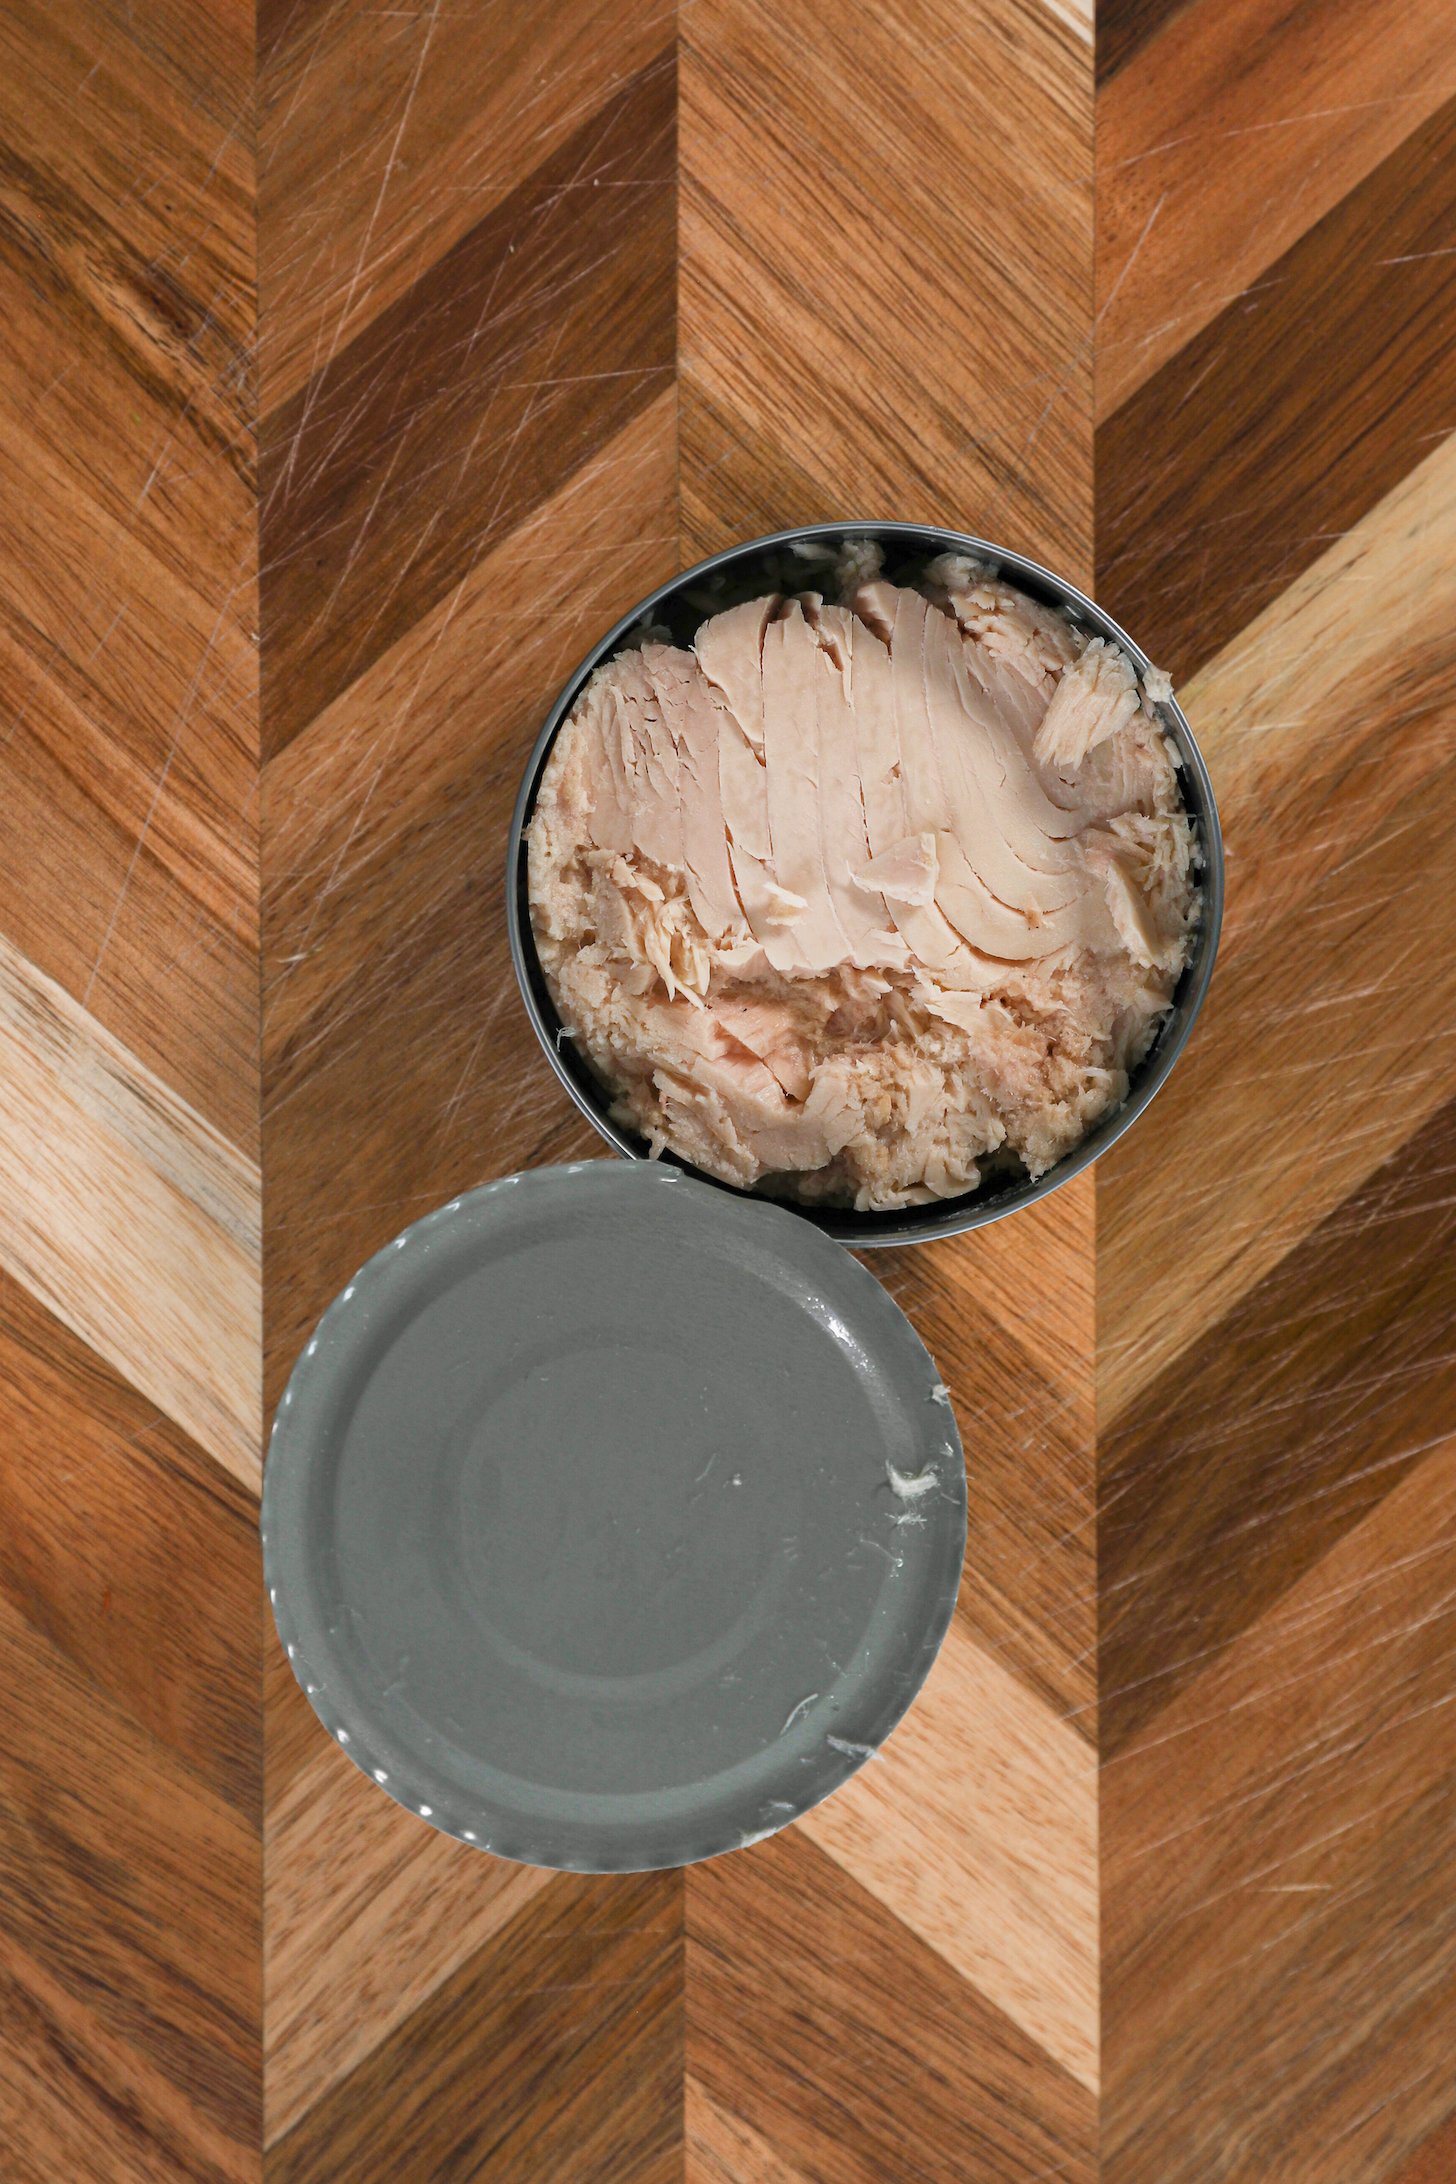 A open can of drained tuna fish on a wooden board.